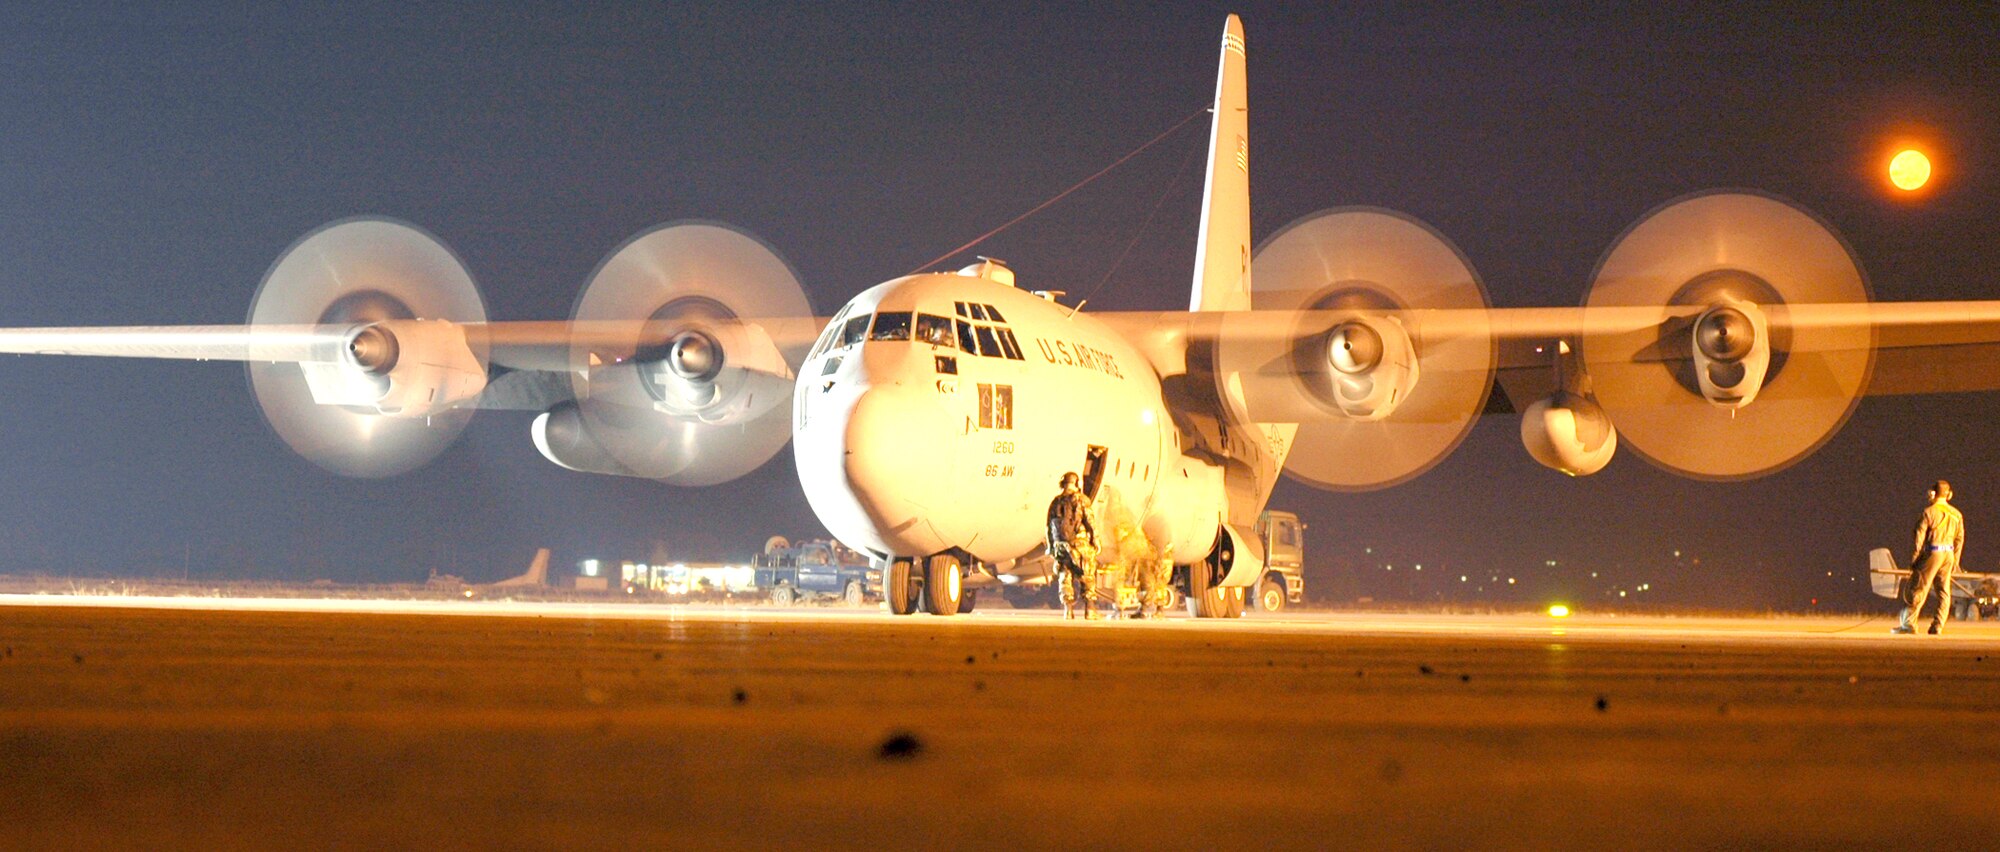 KIGALI INTERNATIONAL AIRPORT, Rwanda - A C-130 Hercules prepares to take off in the early morning hours as members of the 86th Air Expeditionary Group work to get the plane in the air. The 86th Aircraft Maintenance Squadron Airmen are deployed from Ramstein Air Base, Germany. (U.S. Air Force photo by Senior Airman Mike Meares)